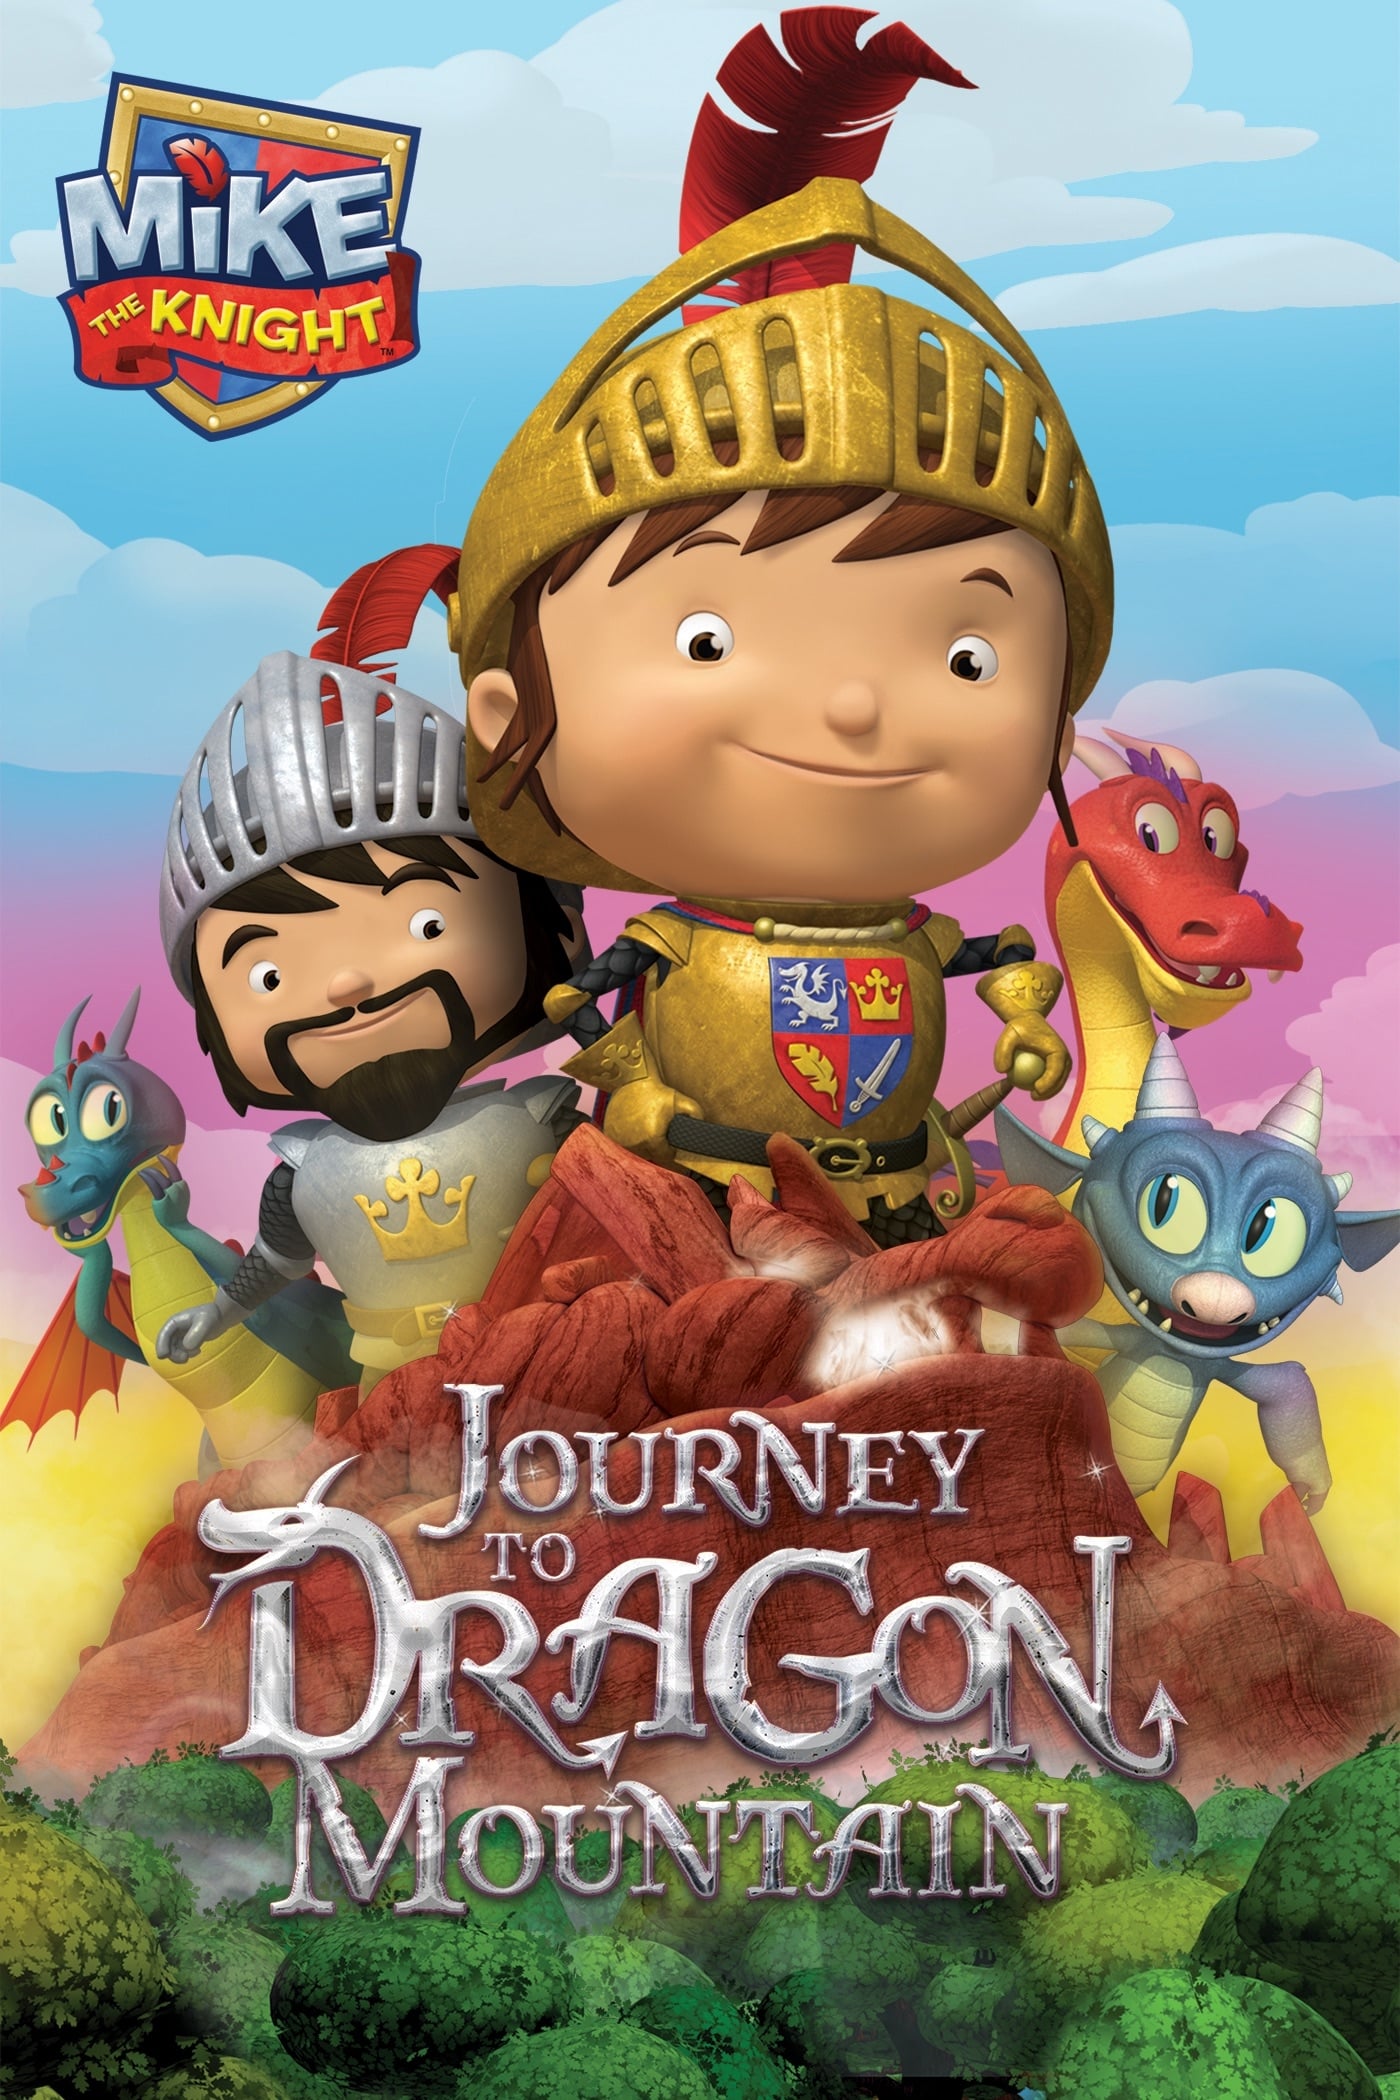 Mike the Knight: Journey to Dragon Mountain film